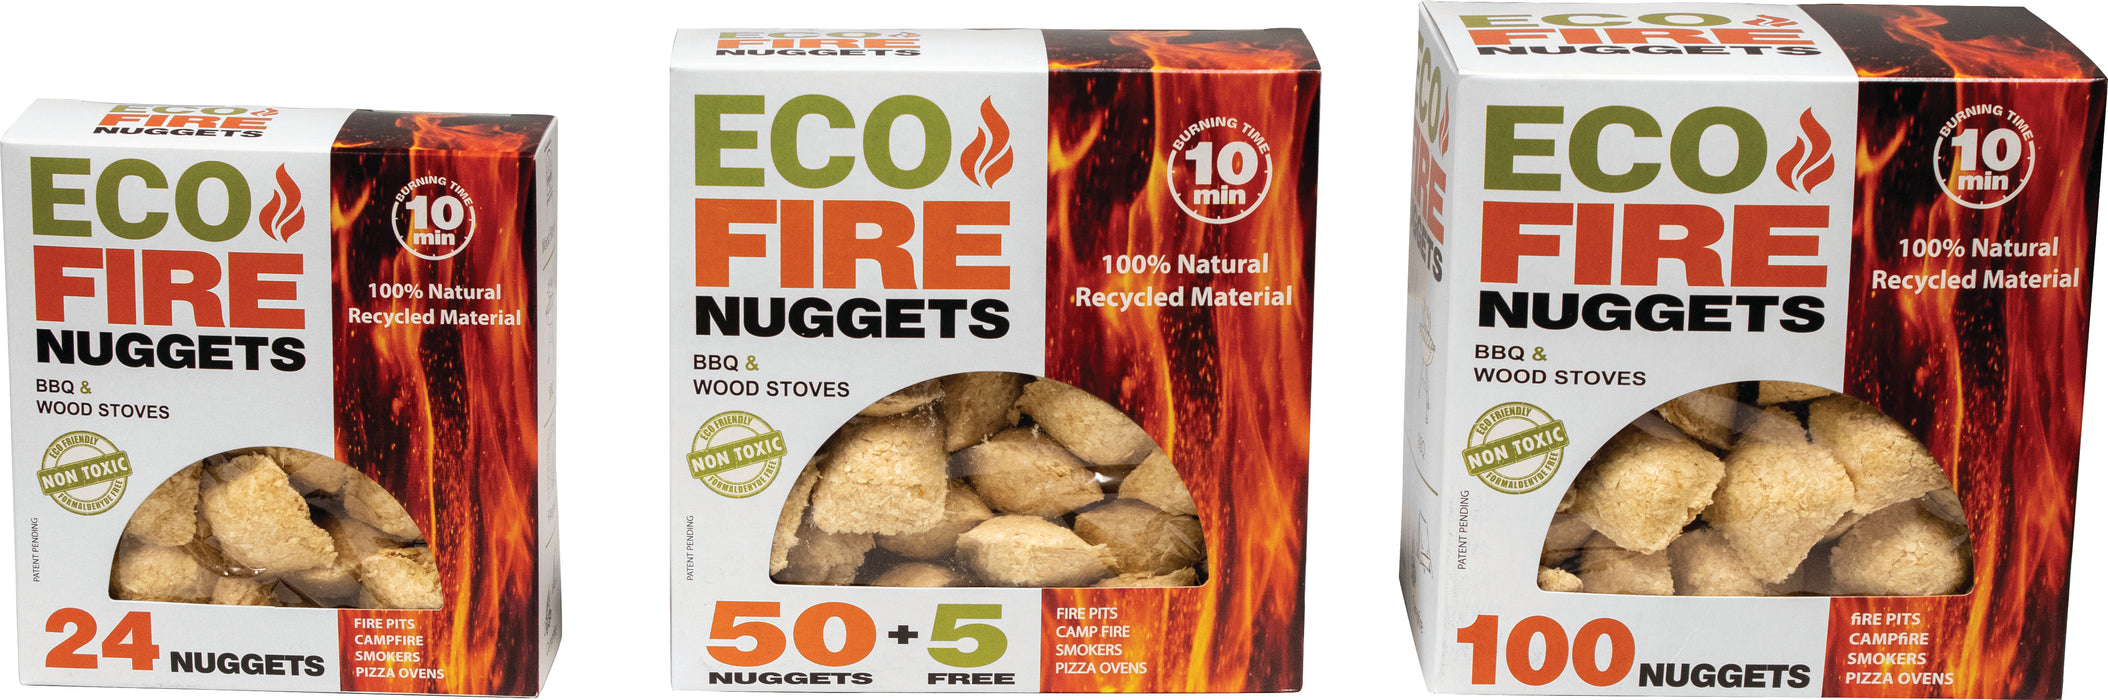 World Famous Eco Fire Nuggets